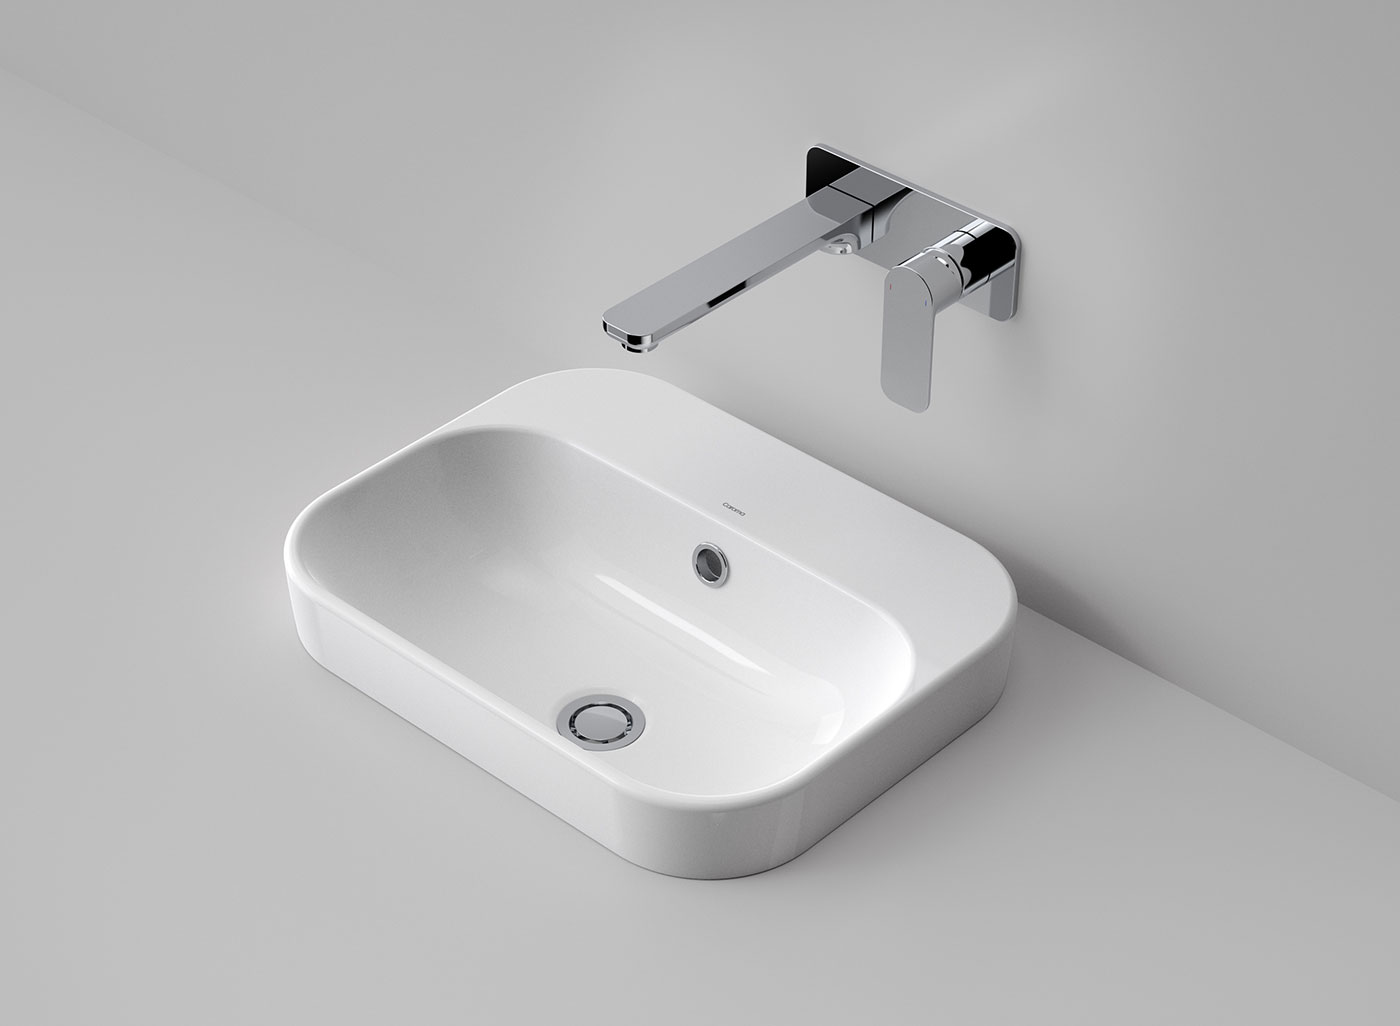 subdued curves of Luna will effortlessly flow into any contemporary bathroom. Team up with the rest of the Luna collection for a stylish